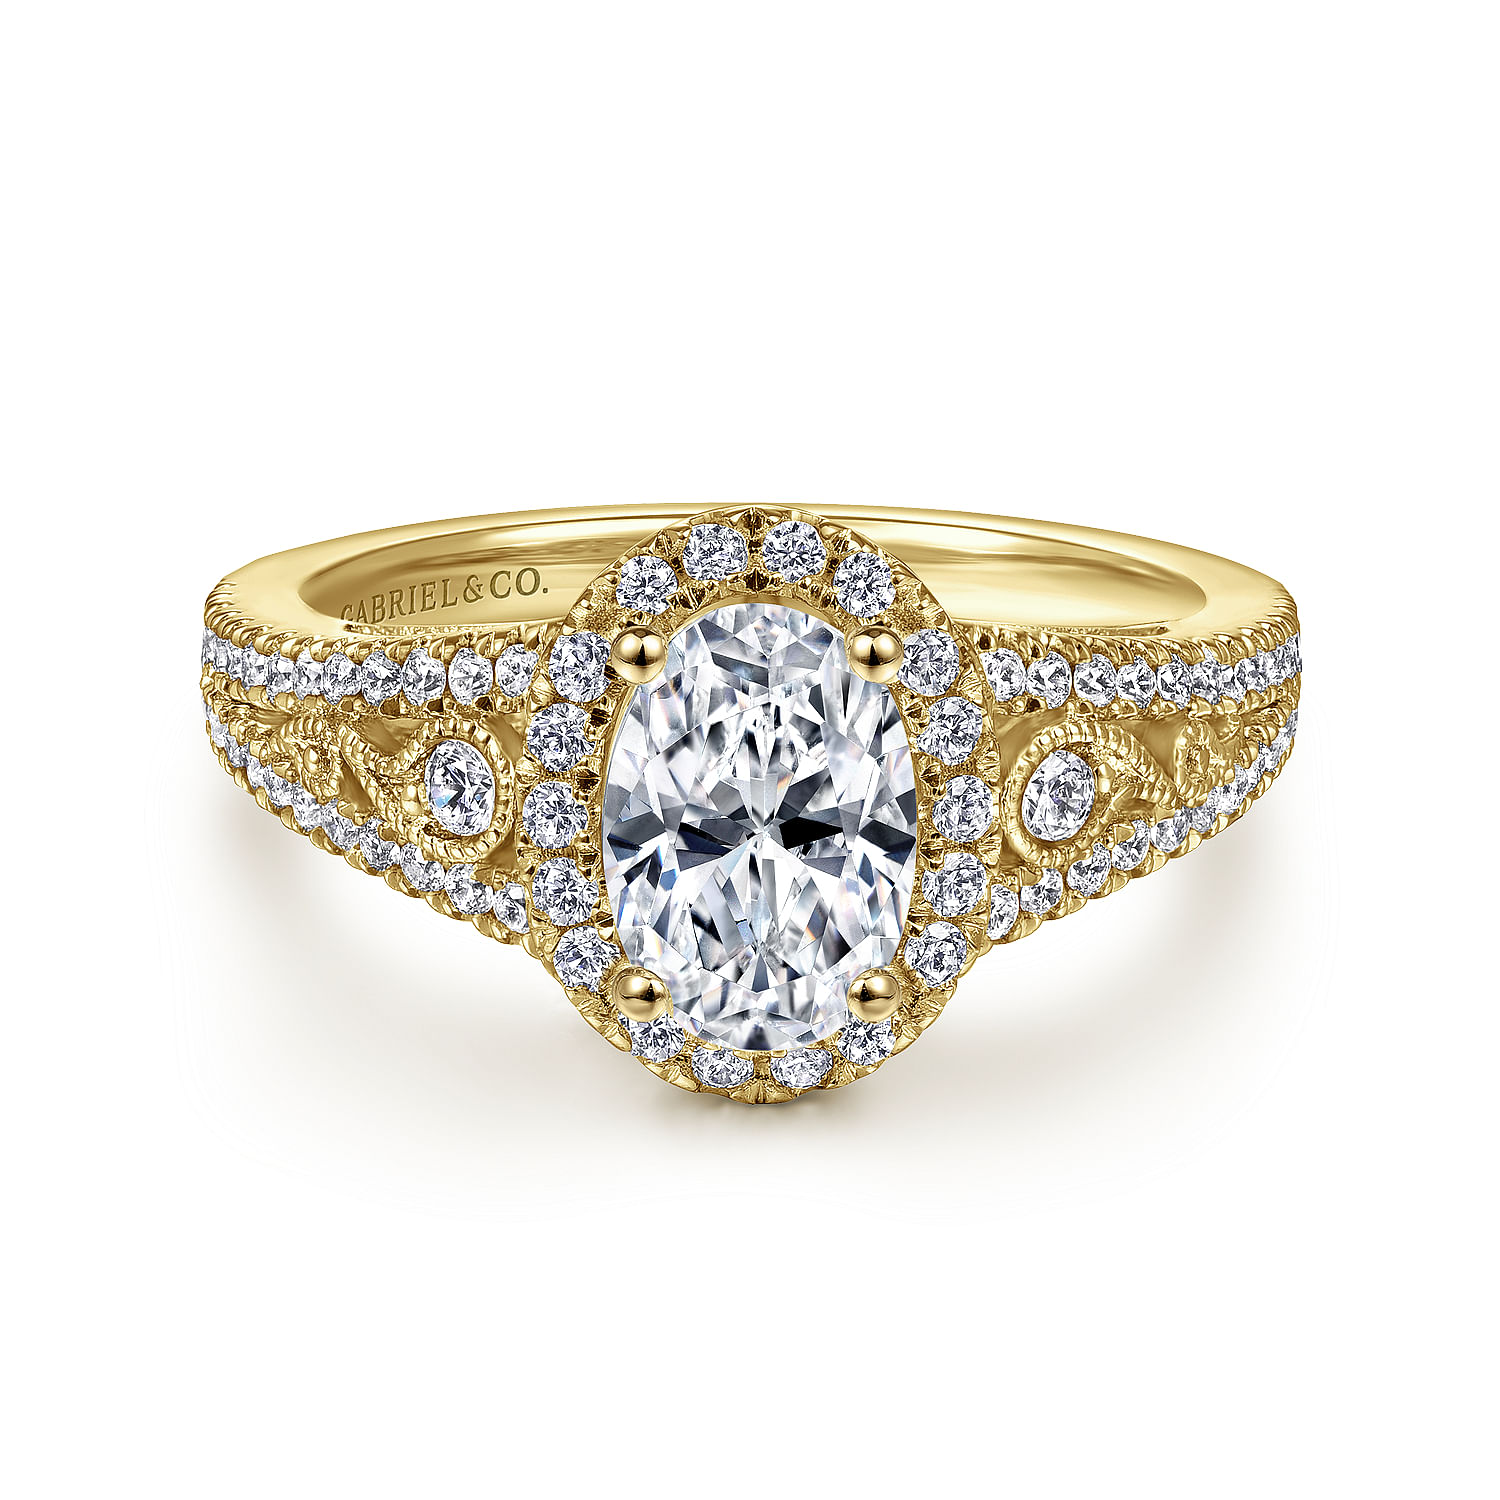 Marlena - Vintage Inspired 14K Yellow Gold Oval Halo Diamond Engagement Ring